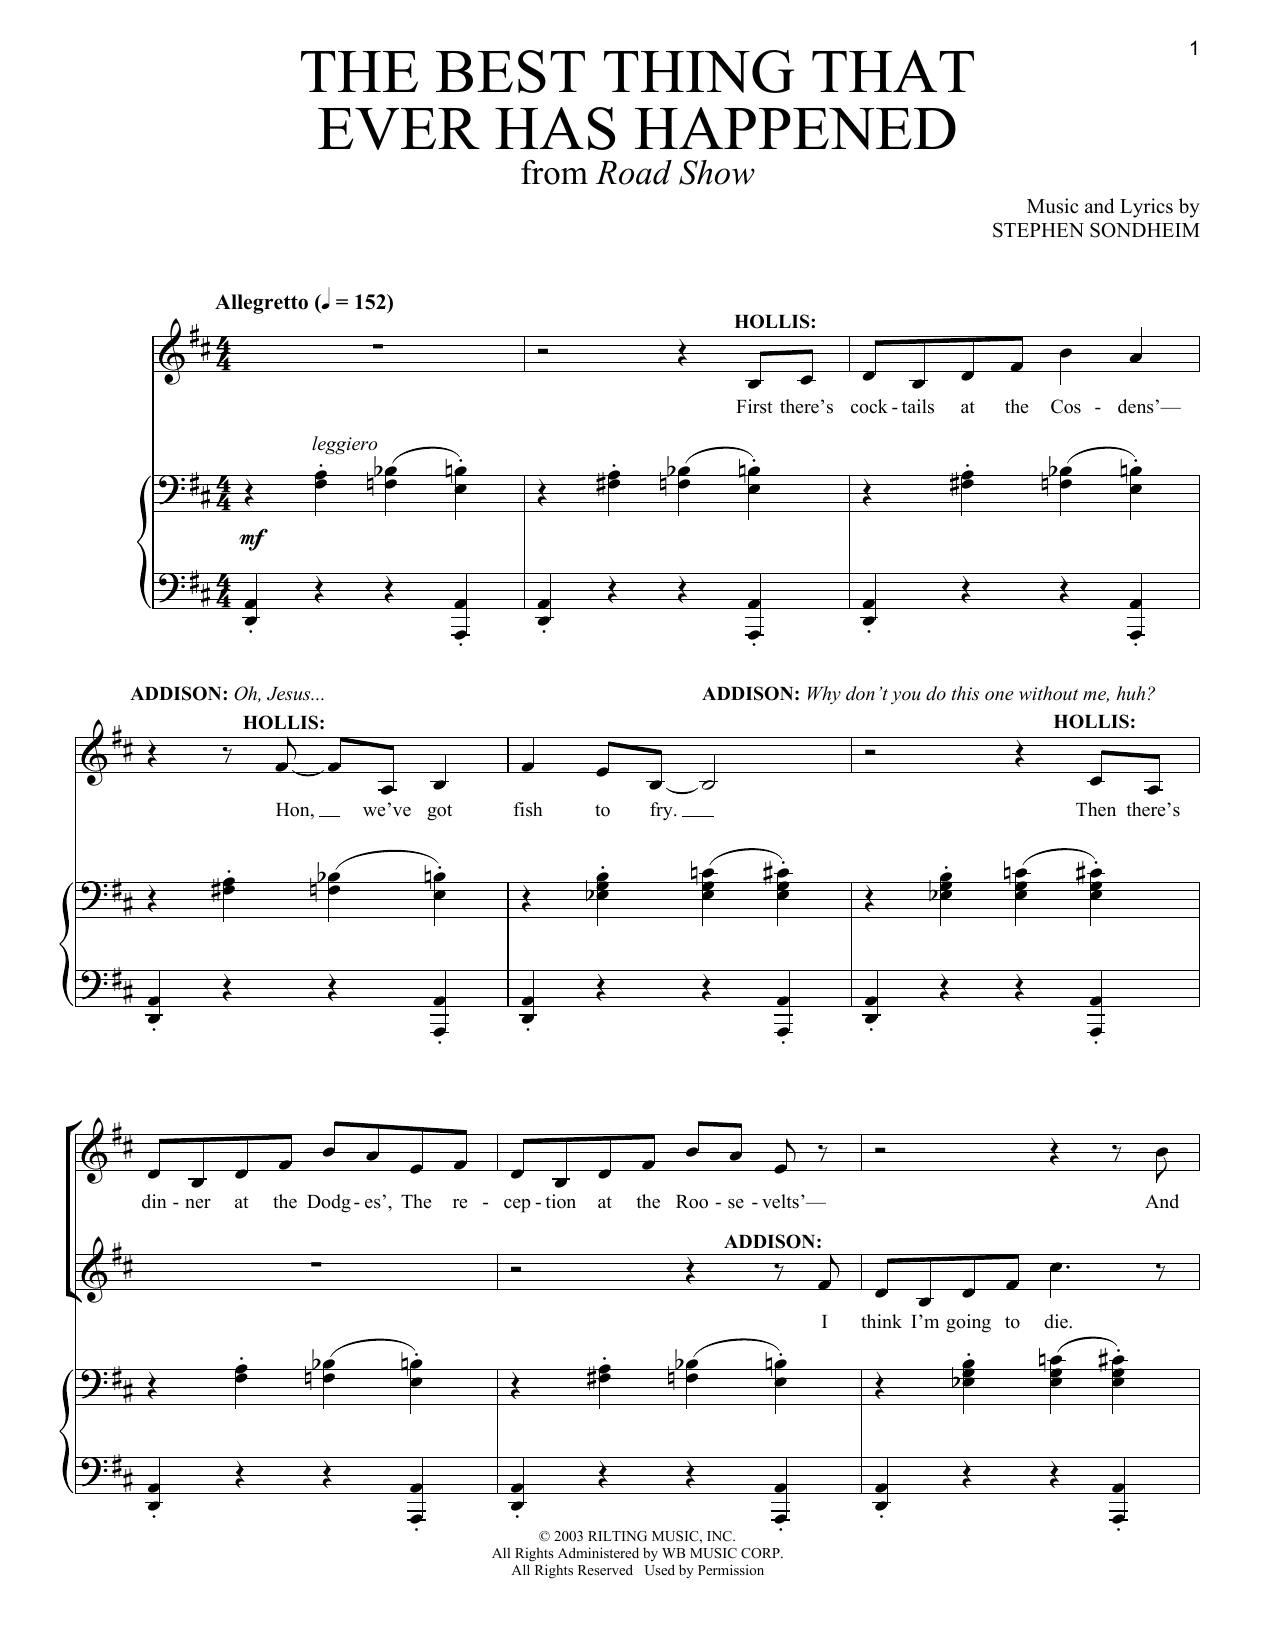 Download Stephen Sondheim The Best Thing That Ever Has Happened Sheet Music